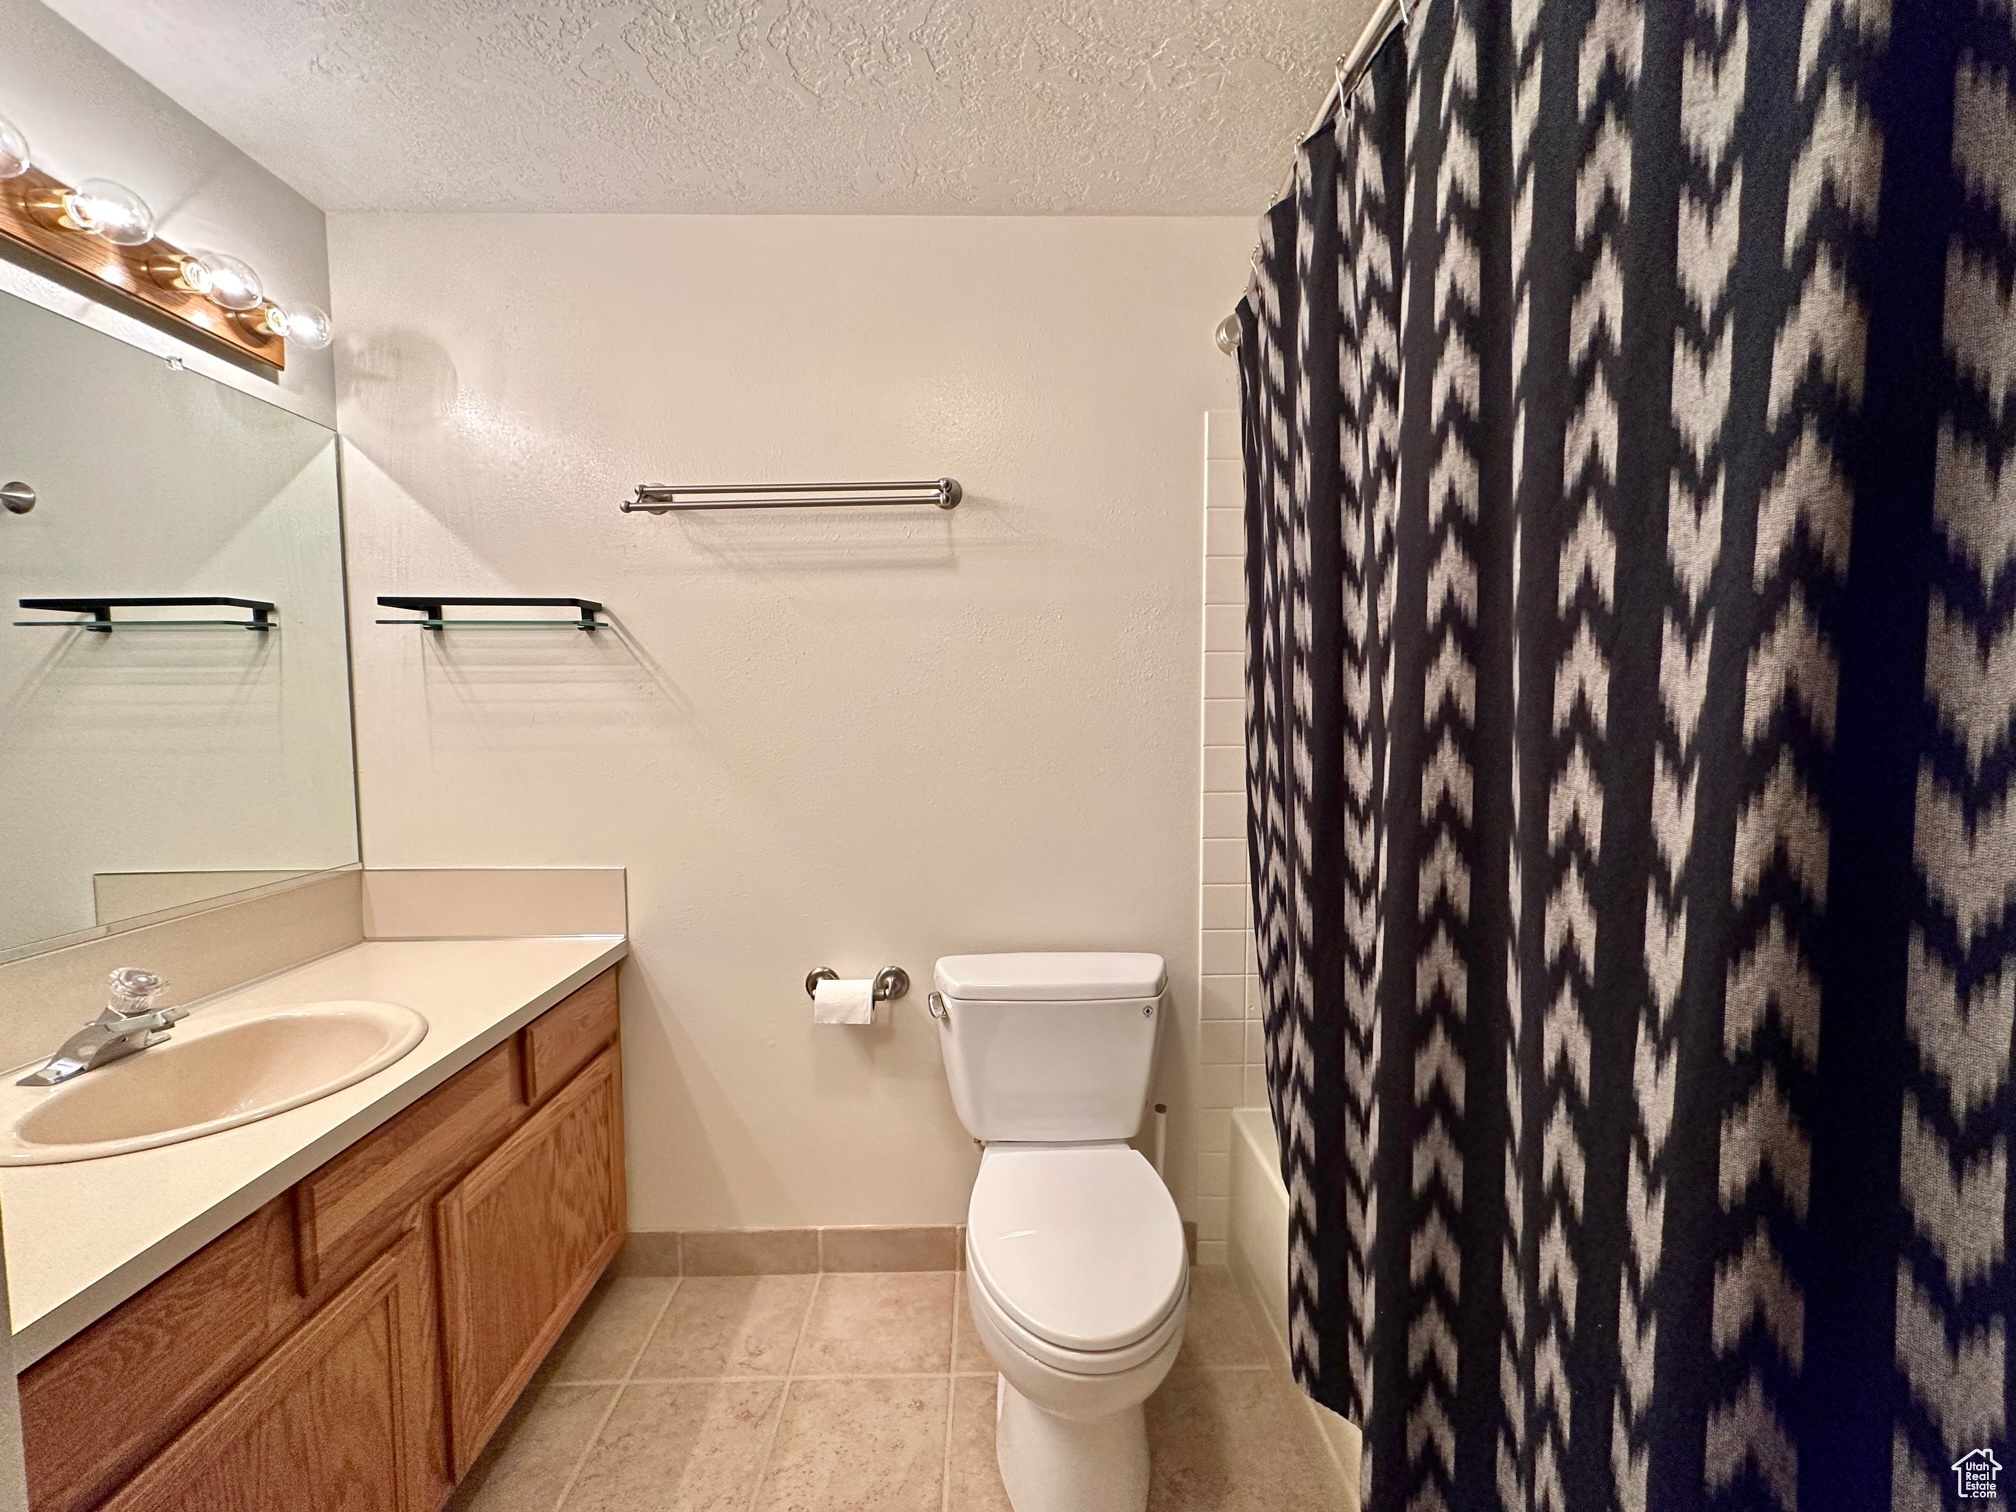 Bathroom featuring tile floors, large vanity, toilet, and a textured ceiling